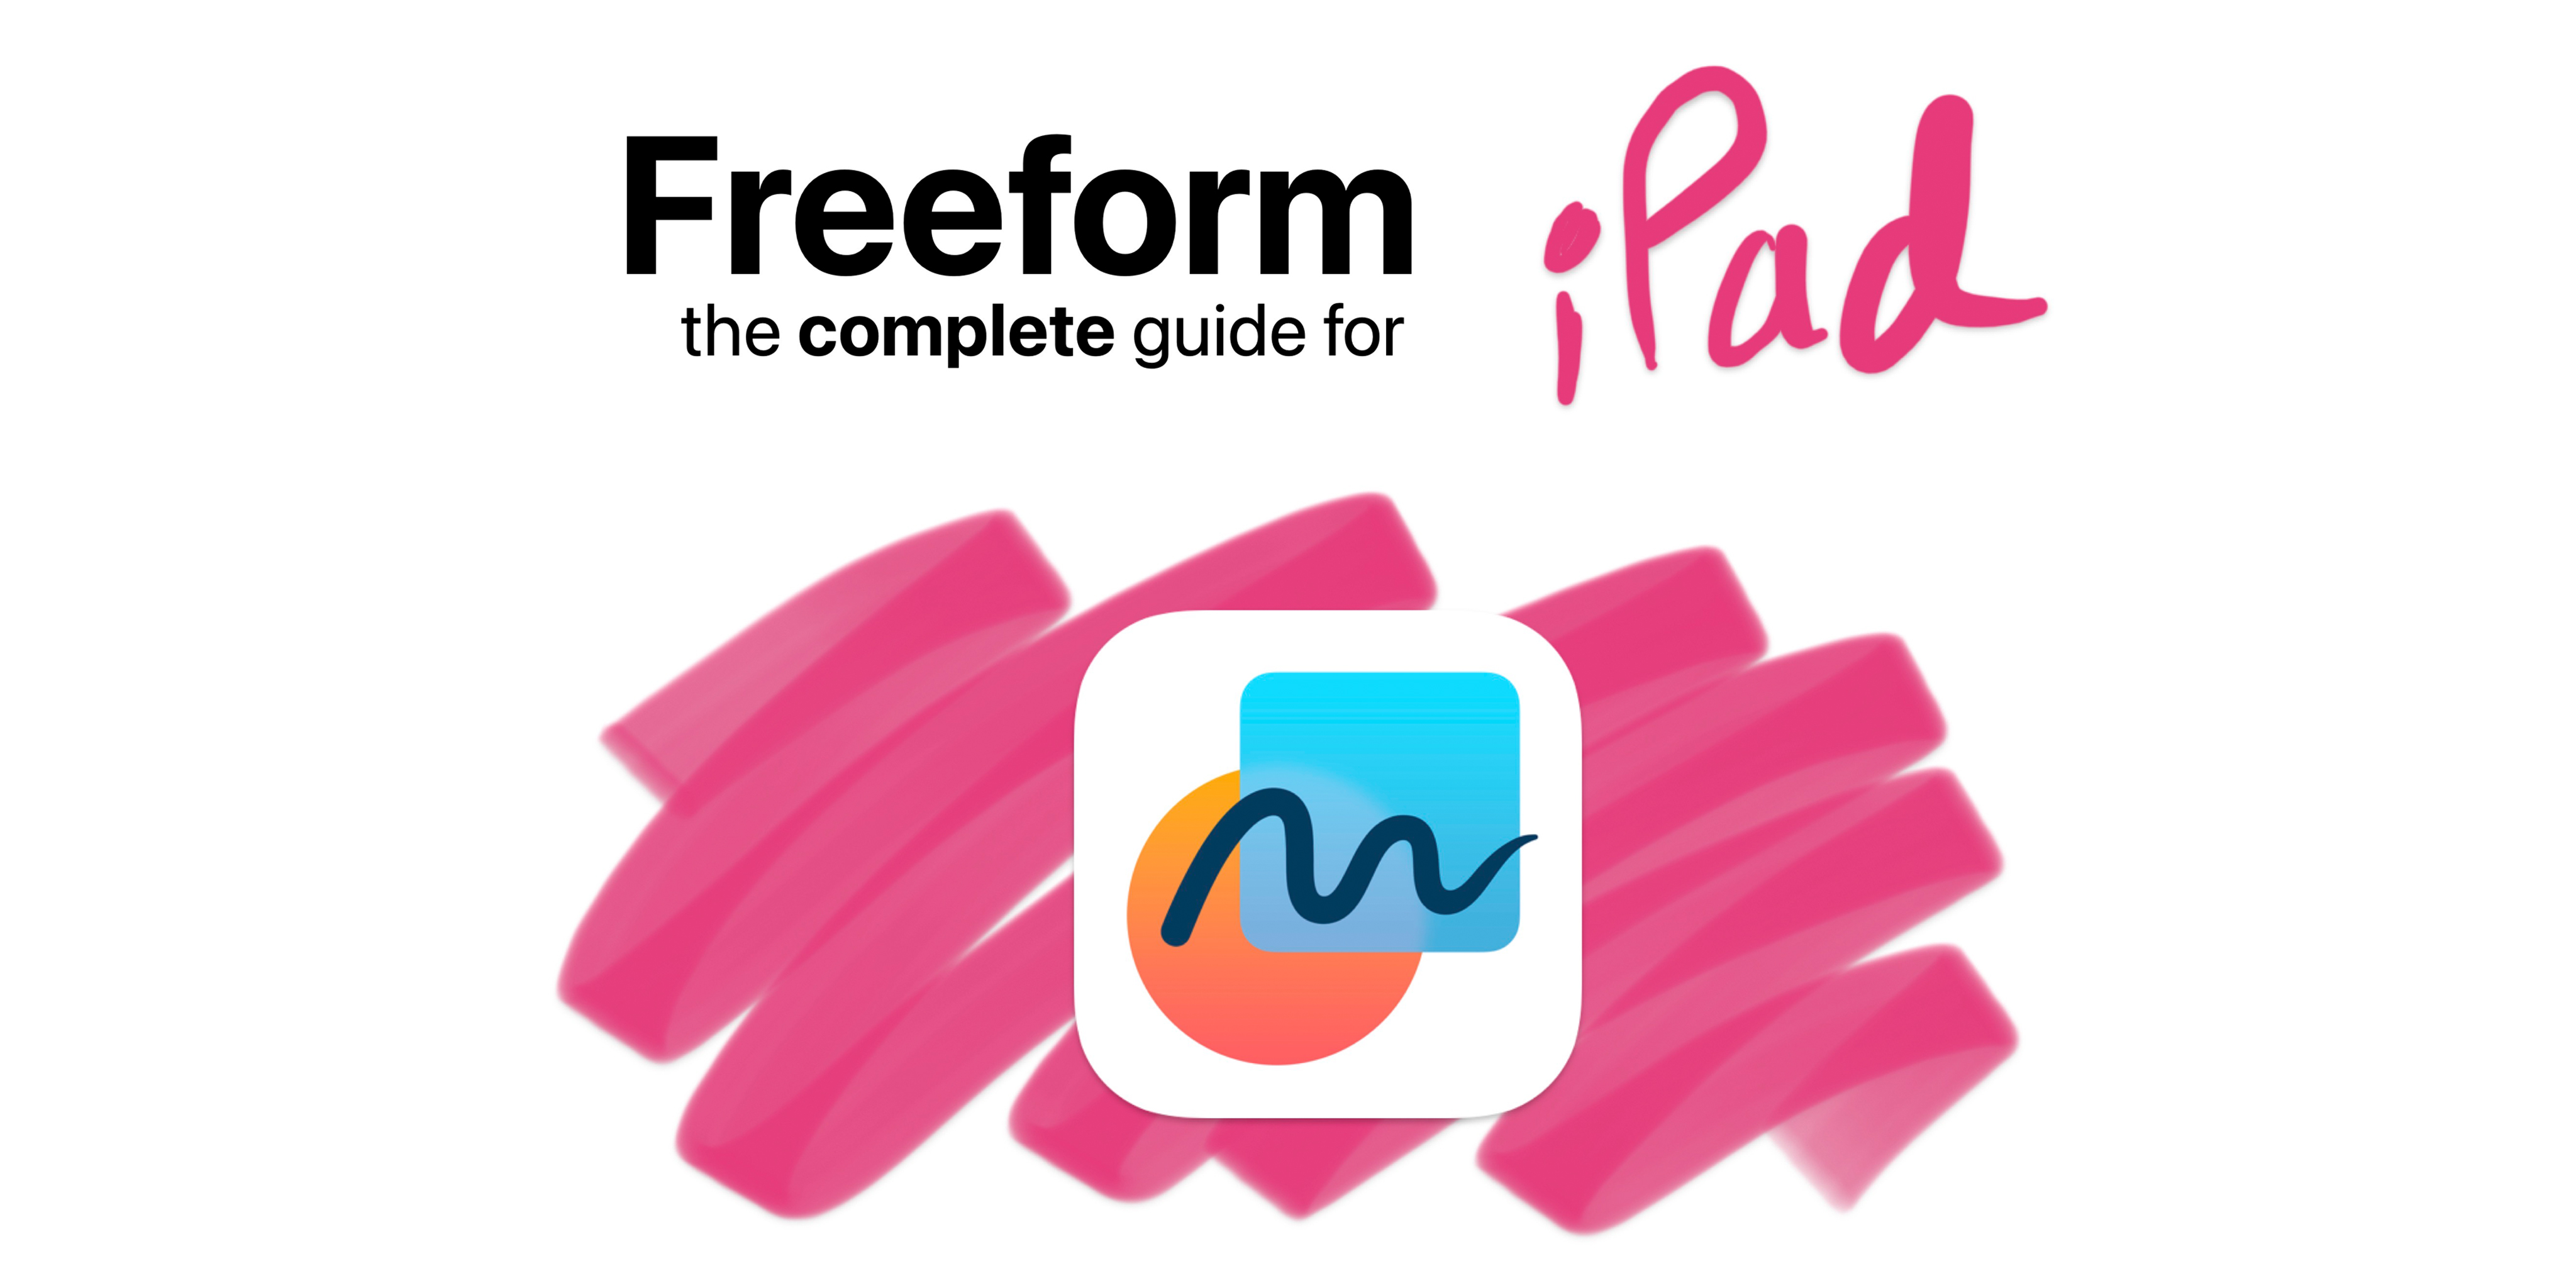 Freeform: A Complete Guide for iPad Graphic